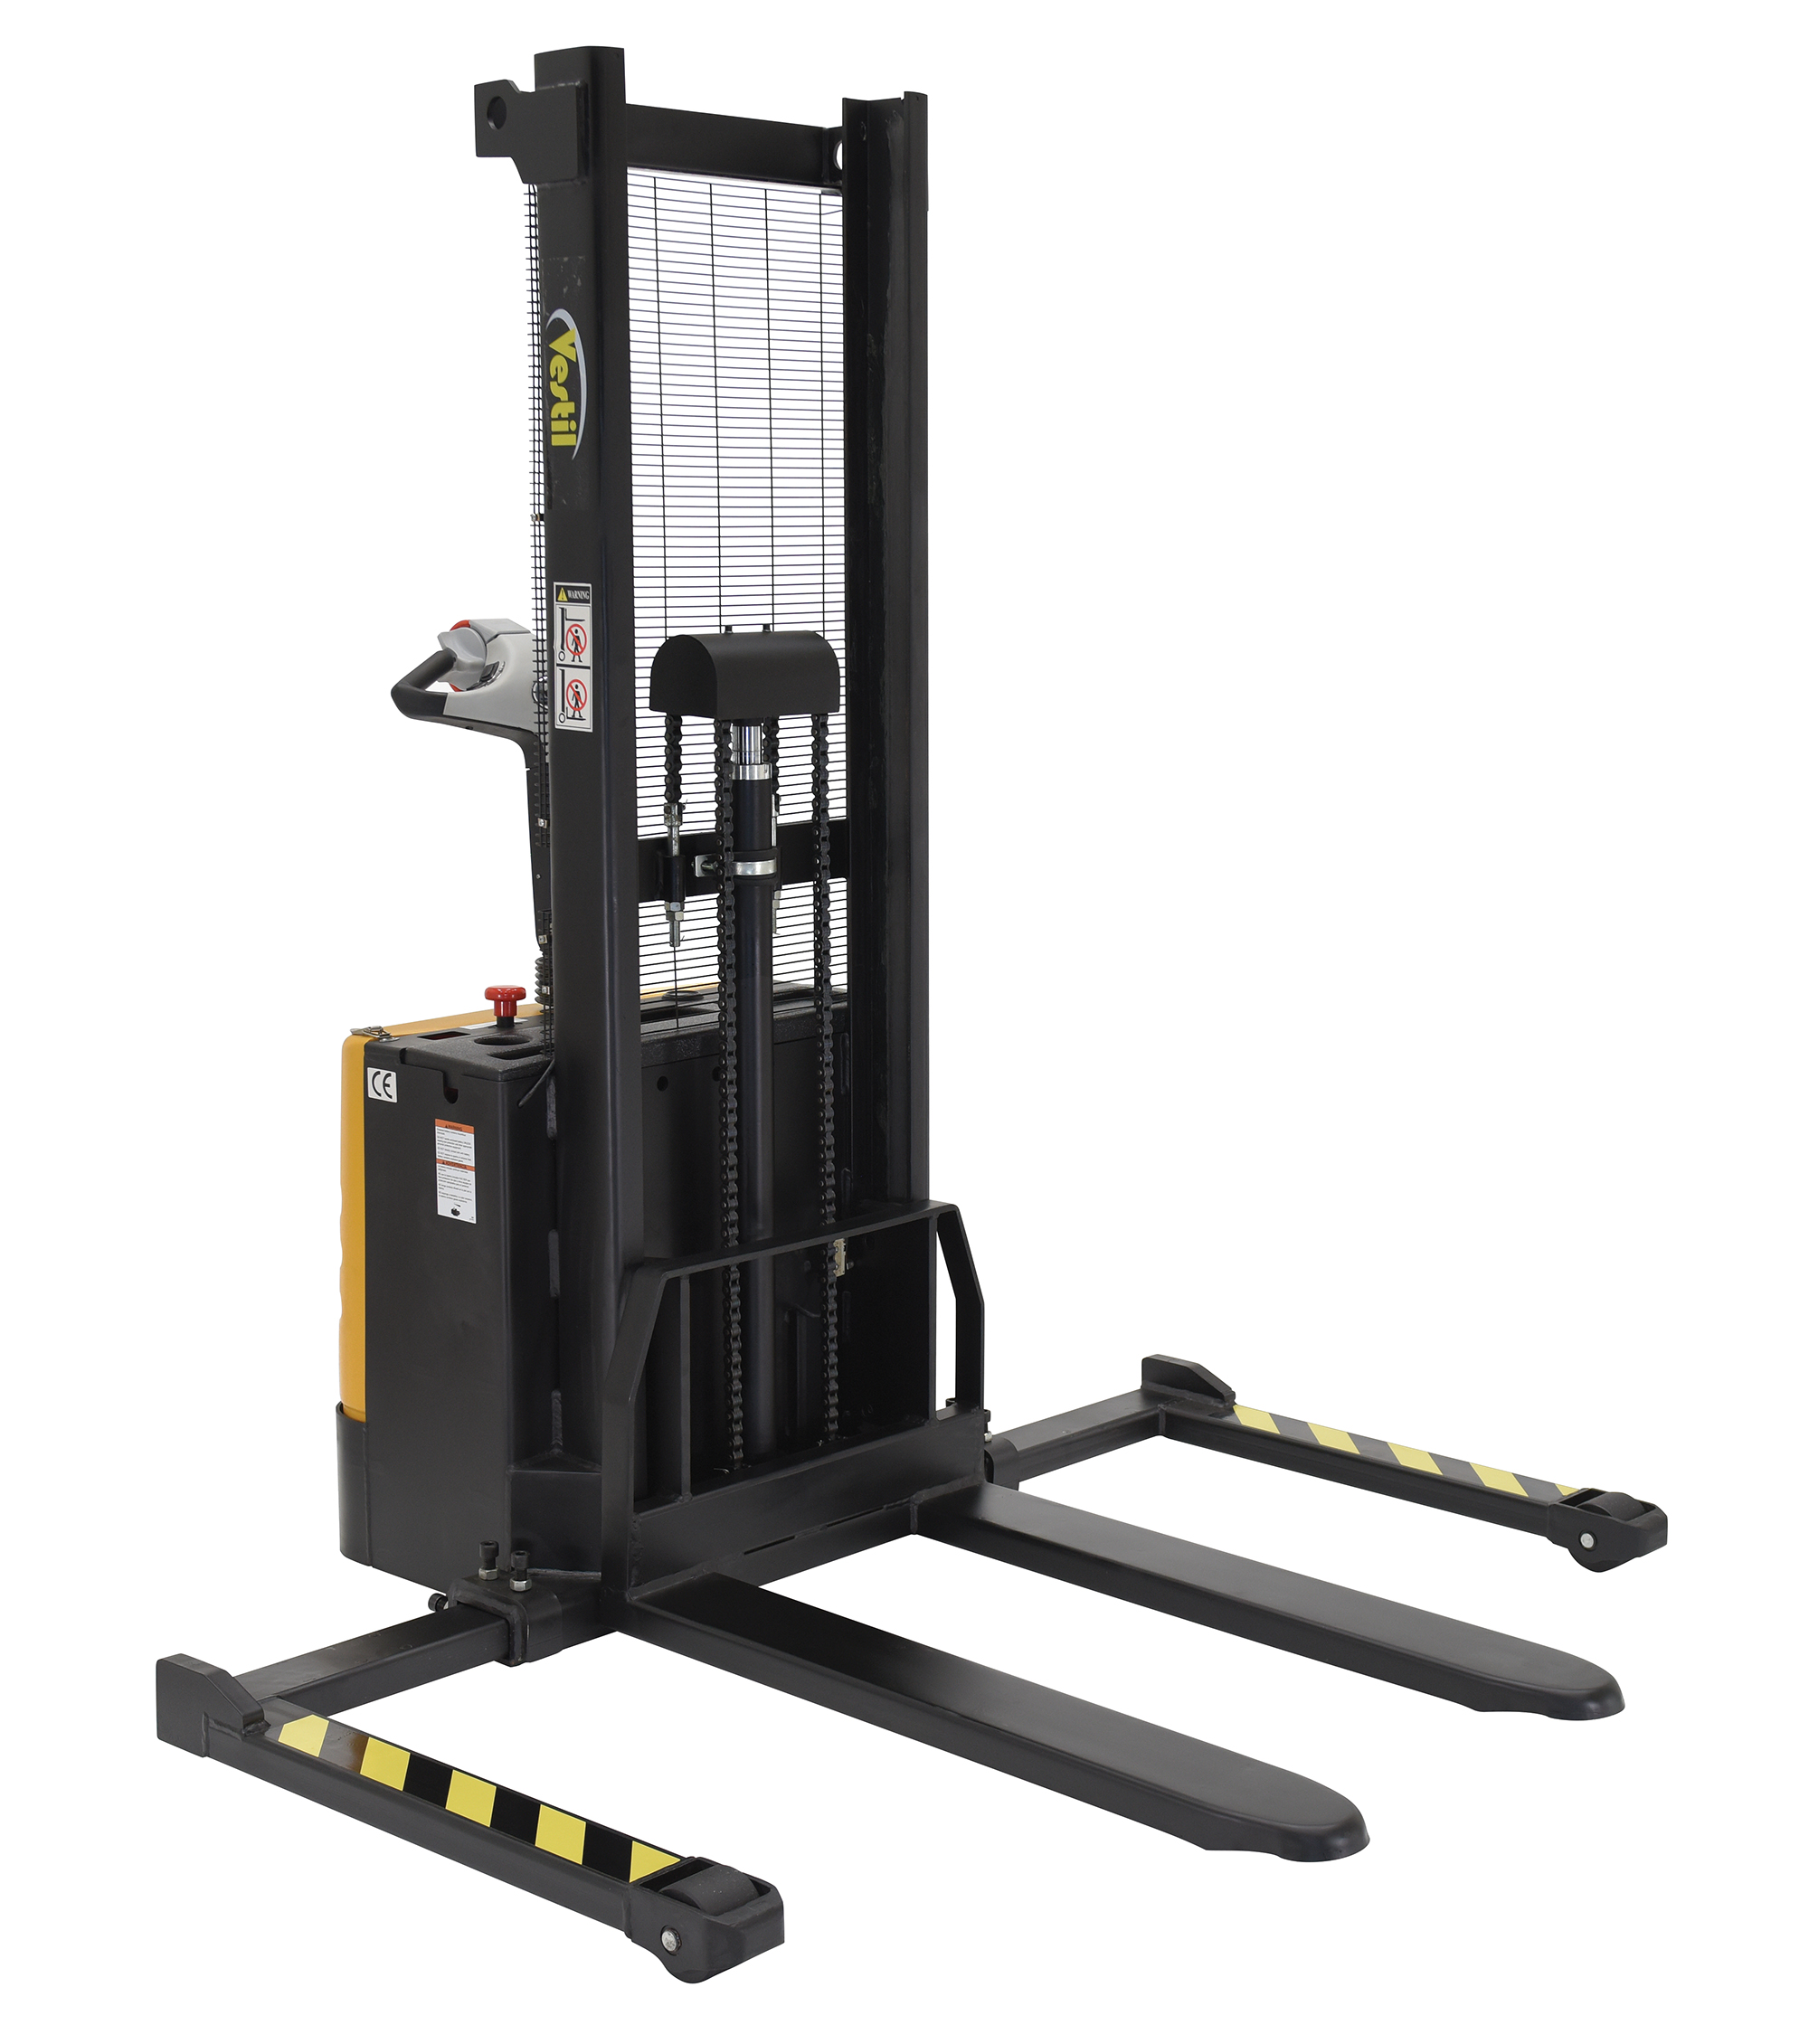 Motorized Stacker, Powered Lift and Drive